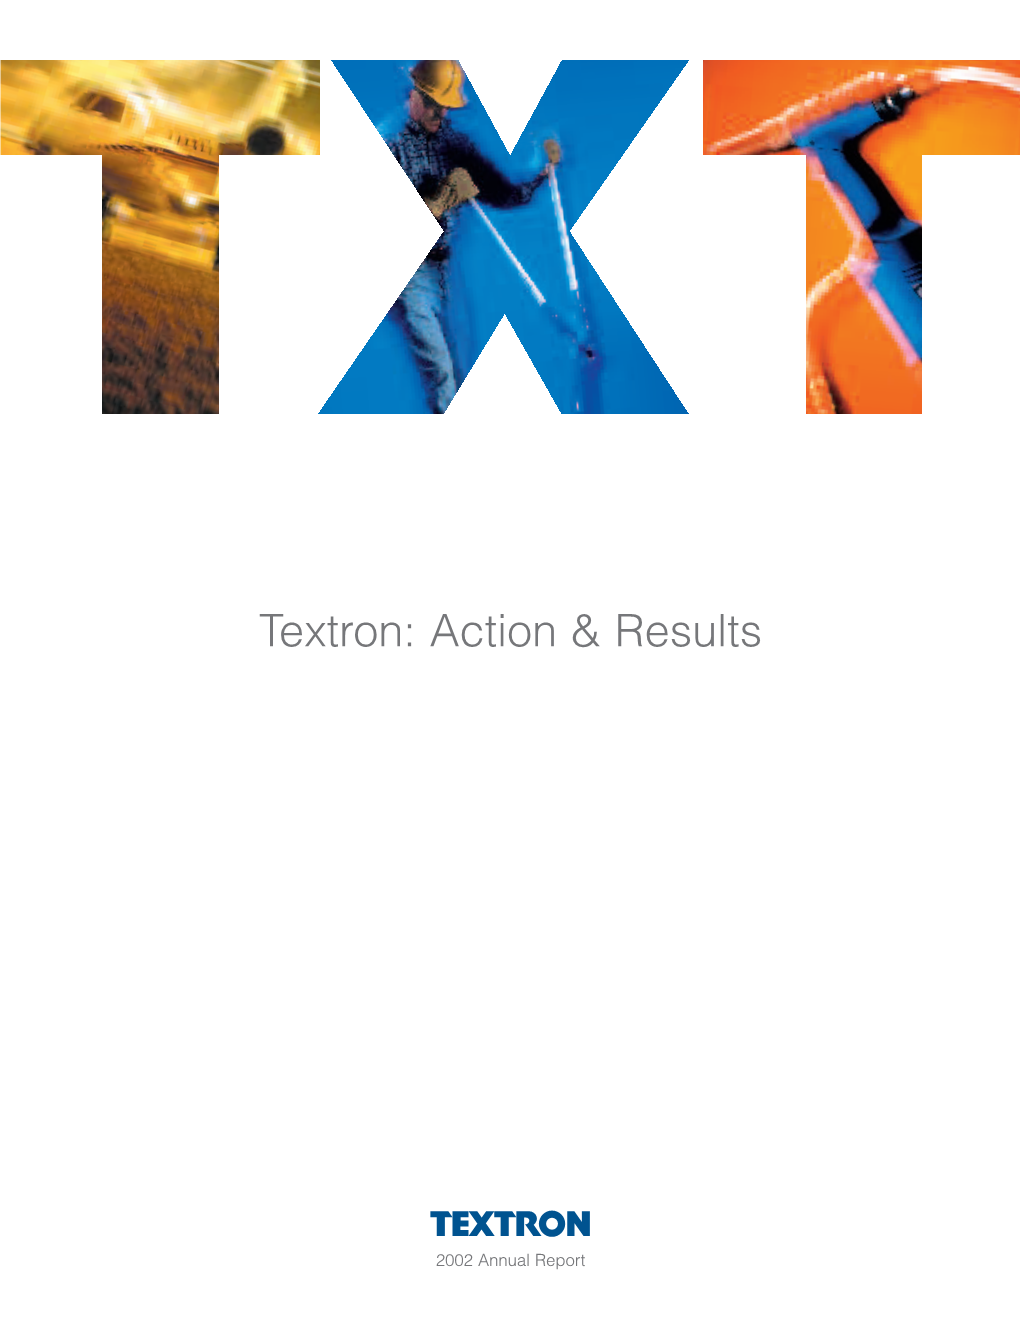 Textron: Action & Results